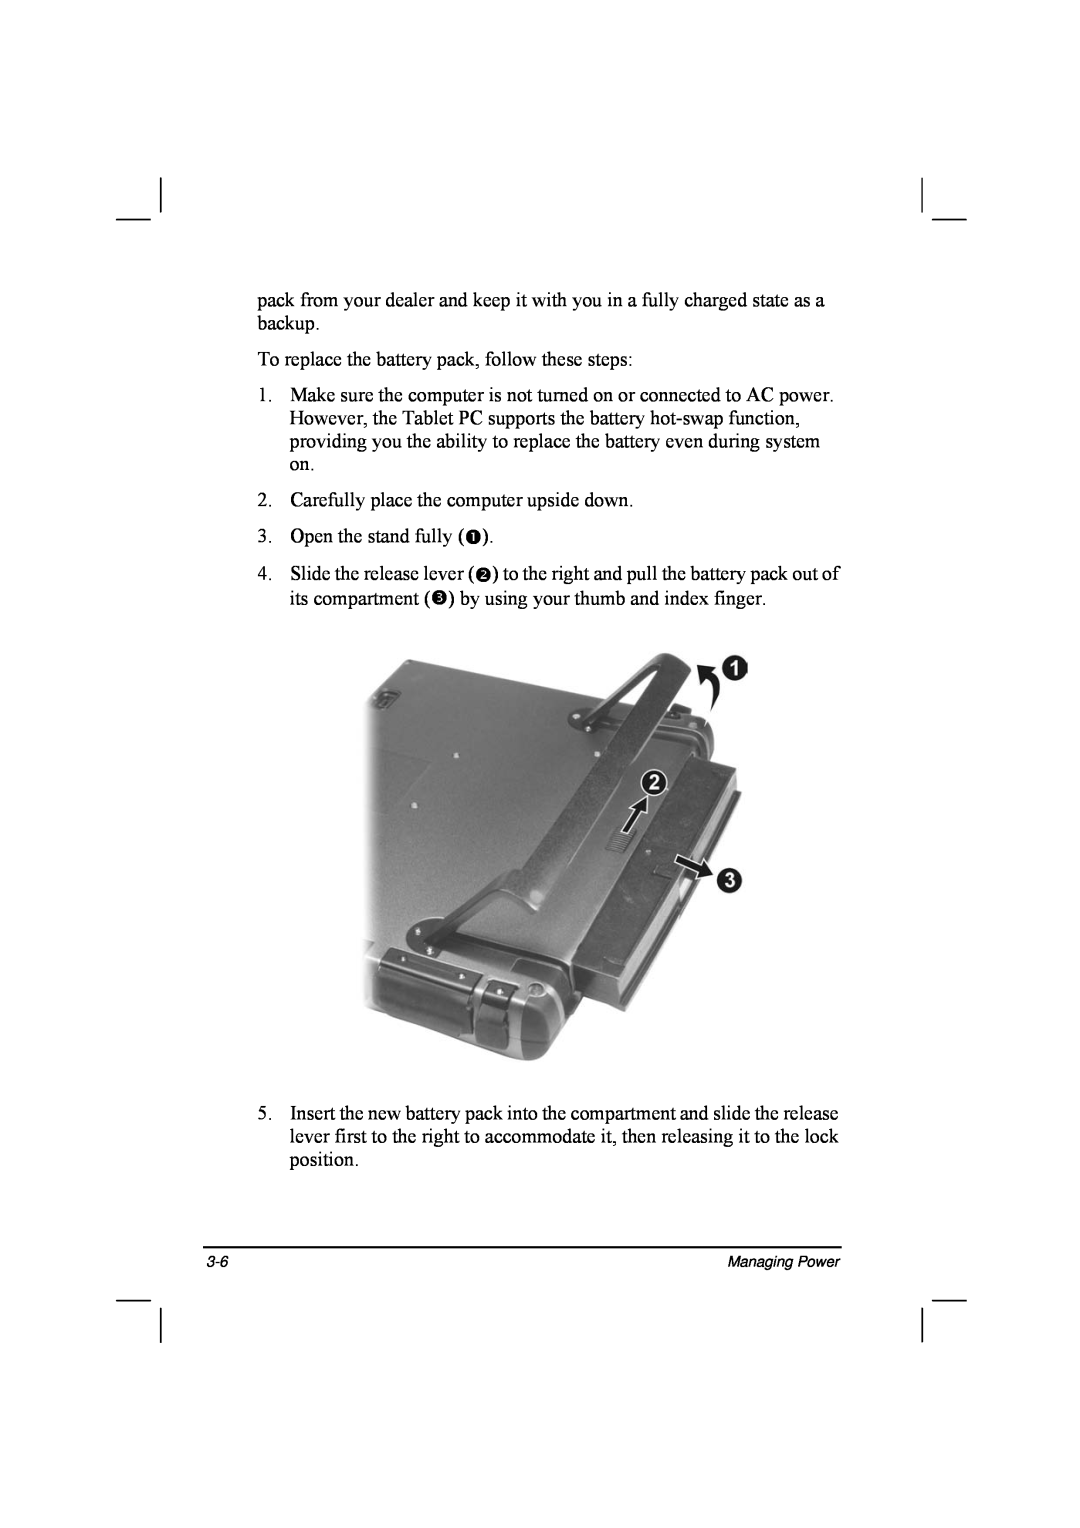 TAG 20 Series manual To replace the battery pack, follow these steps 